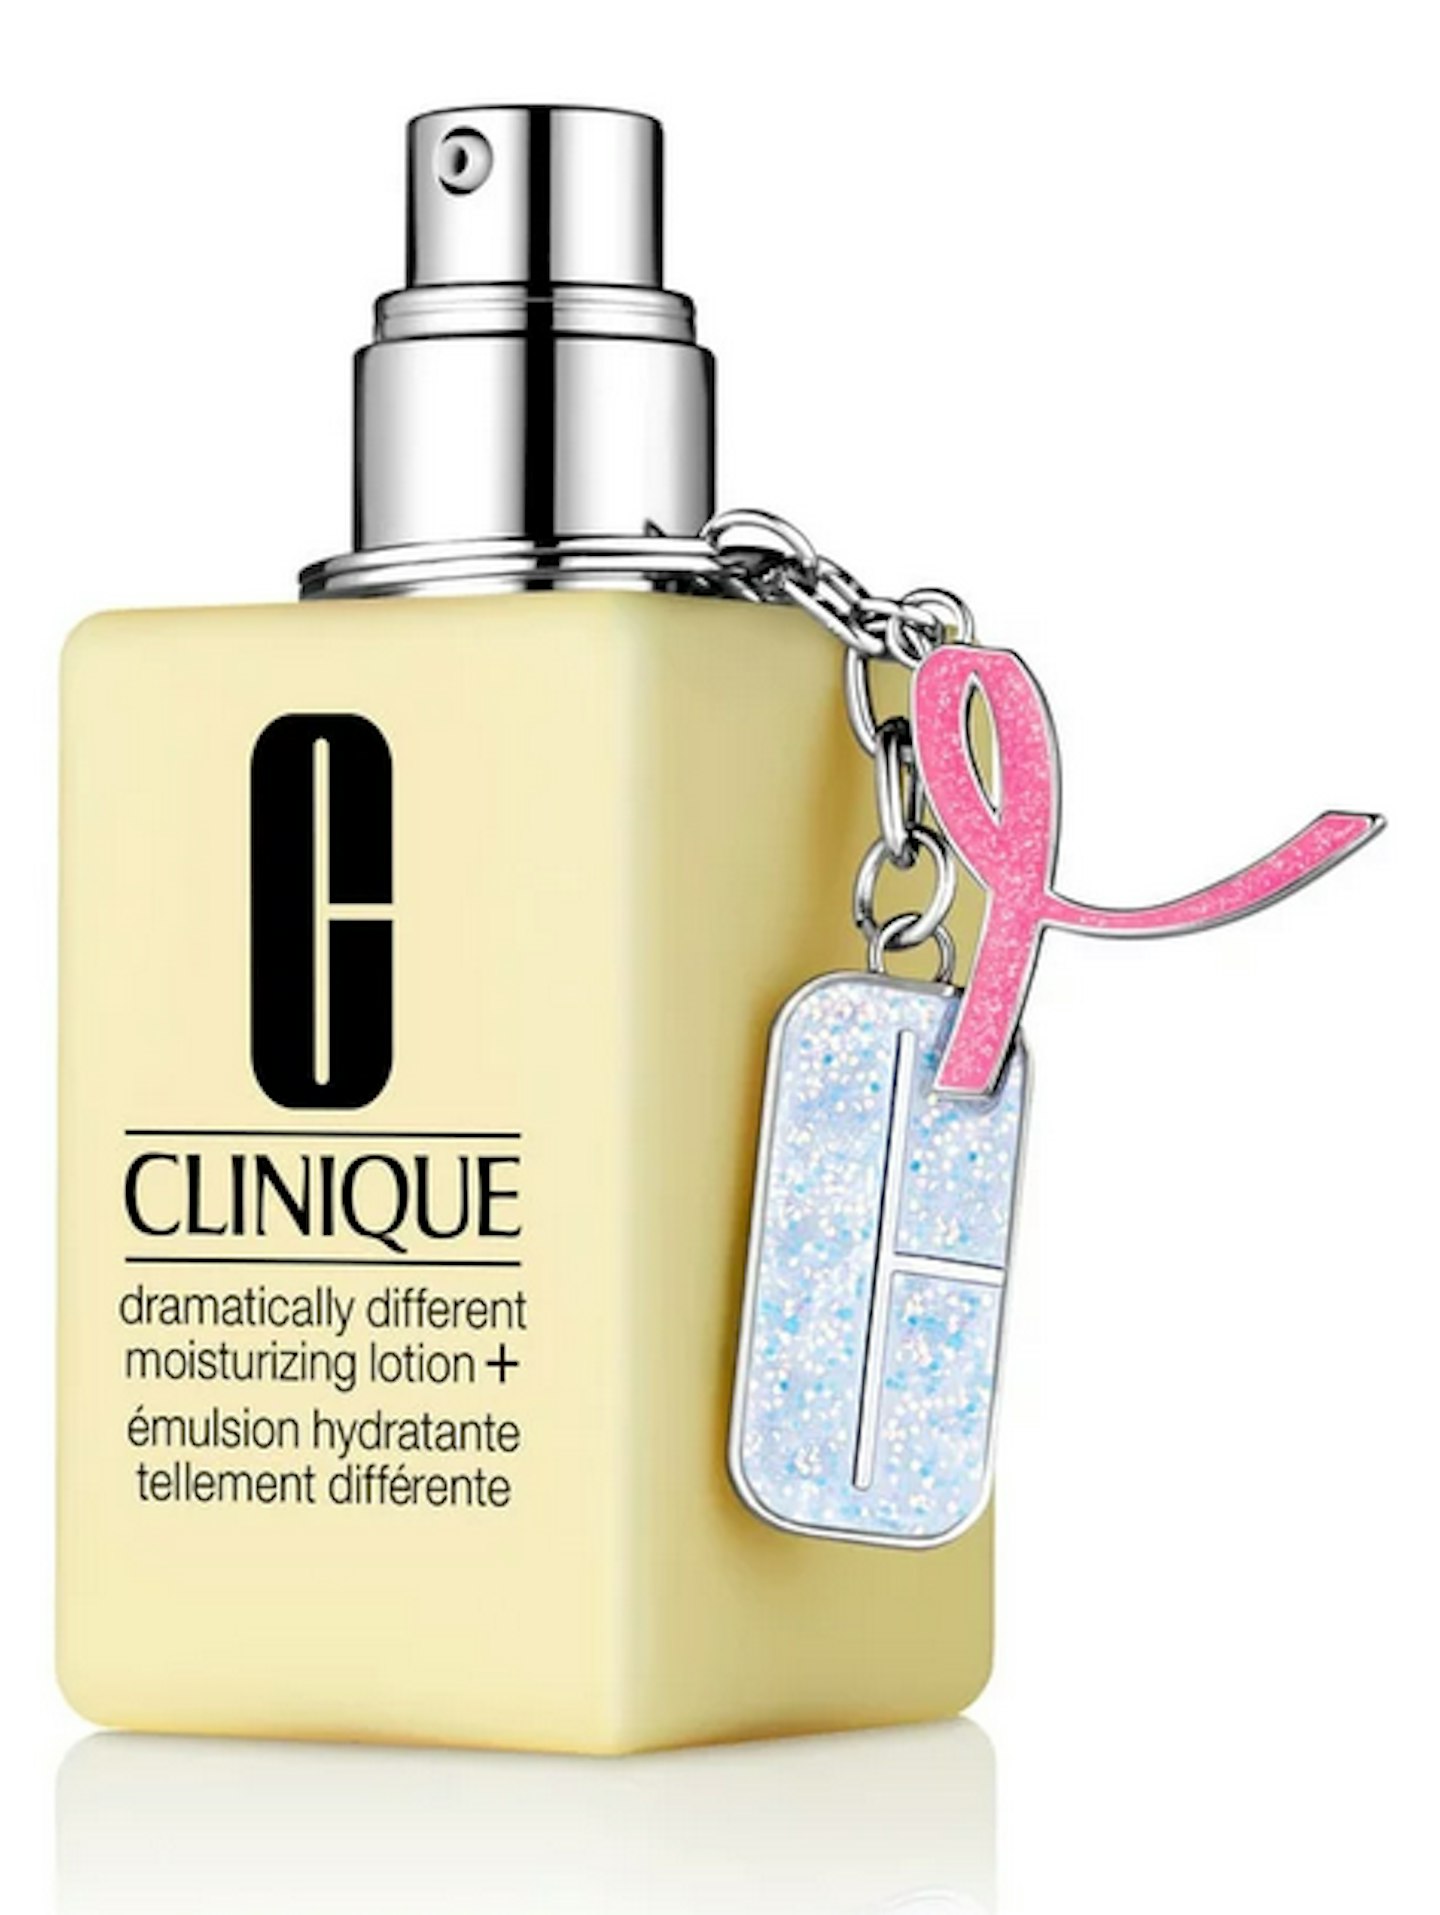 Clinique Great Skin, Great Cause Dramatically Different Moisturising Lotion+, £39